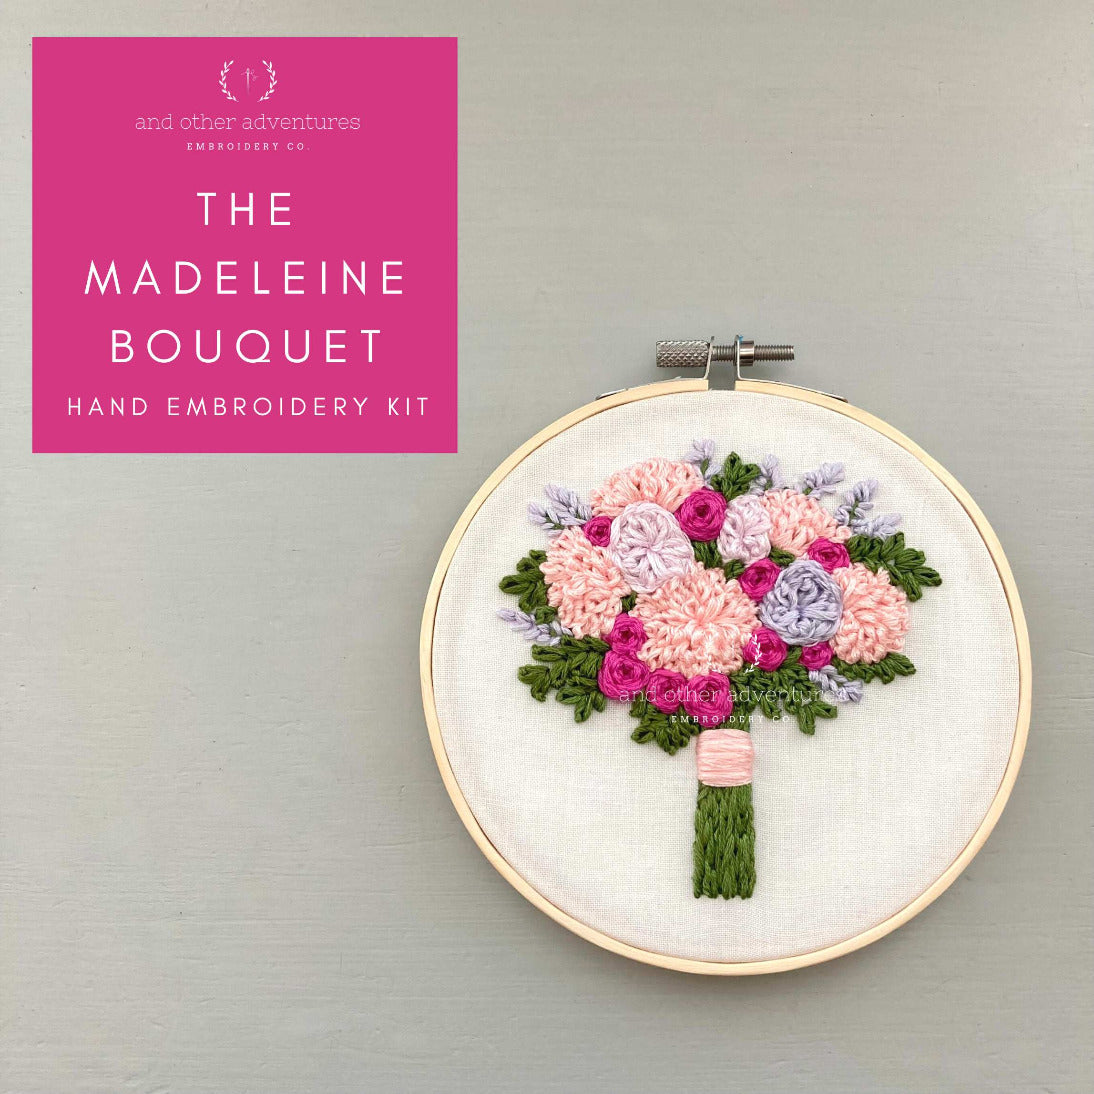 The Madeleine Bouquet Hand Embroidery Kit by And Other Adventures Embroidery Co